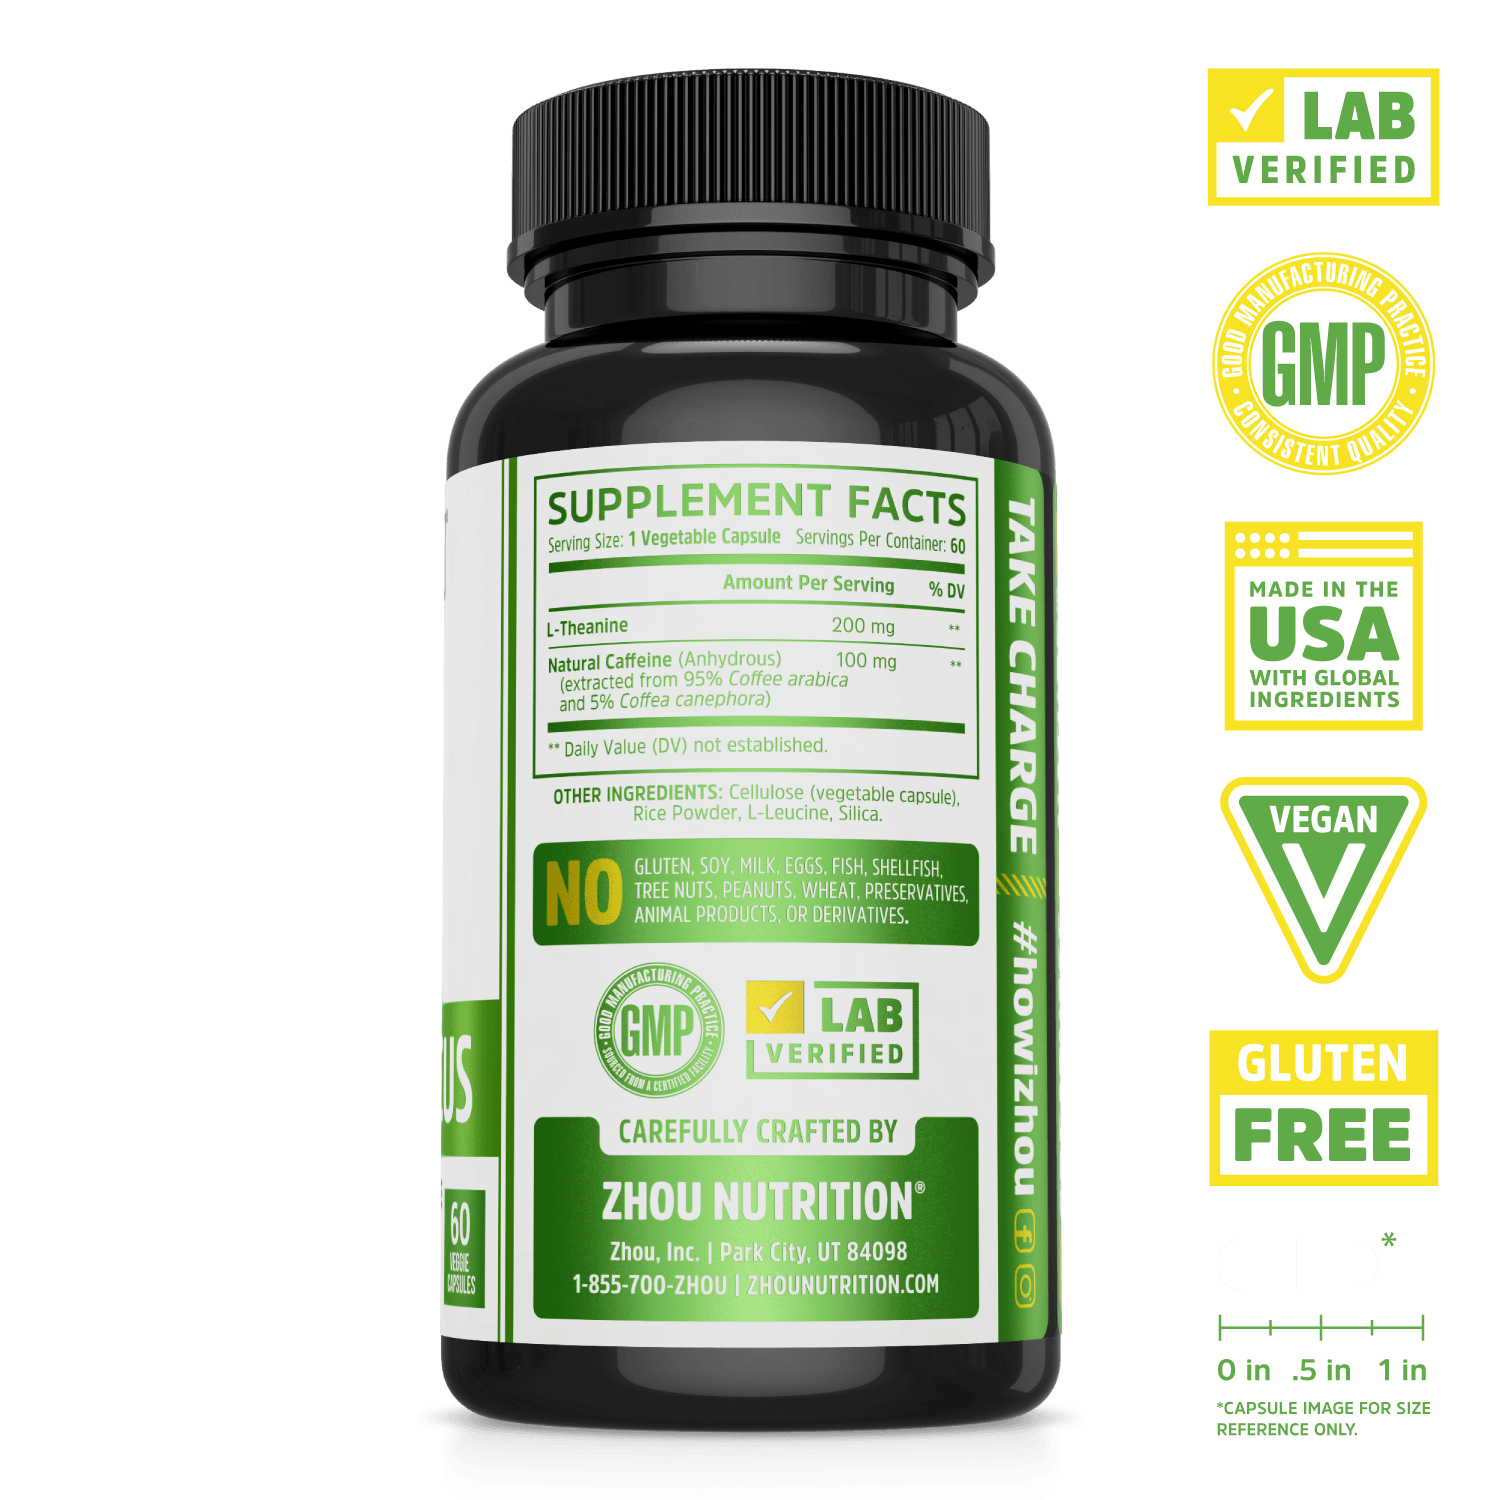 Energy + Focus Smooth and Focused Energy Supplement. Bottle side. Lab verified, good manufacturing practices, made in the USA with global ingredients, vegan, gluten free.